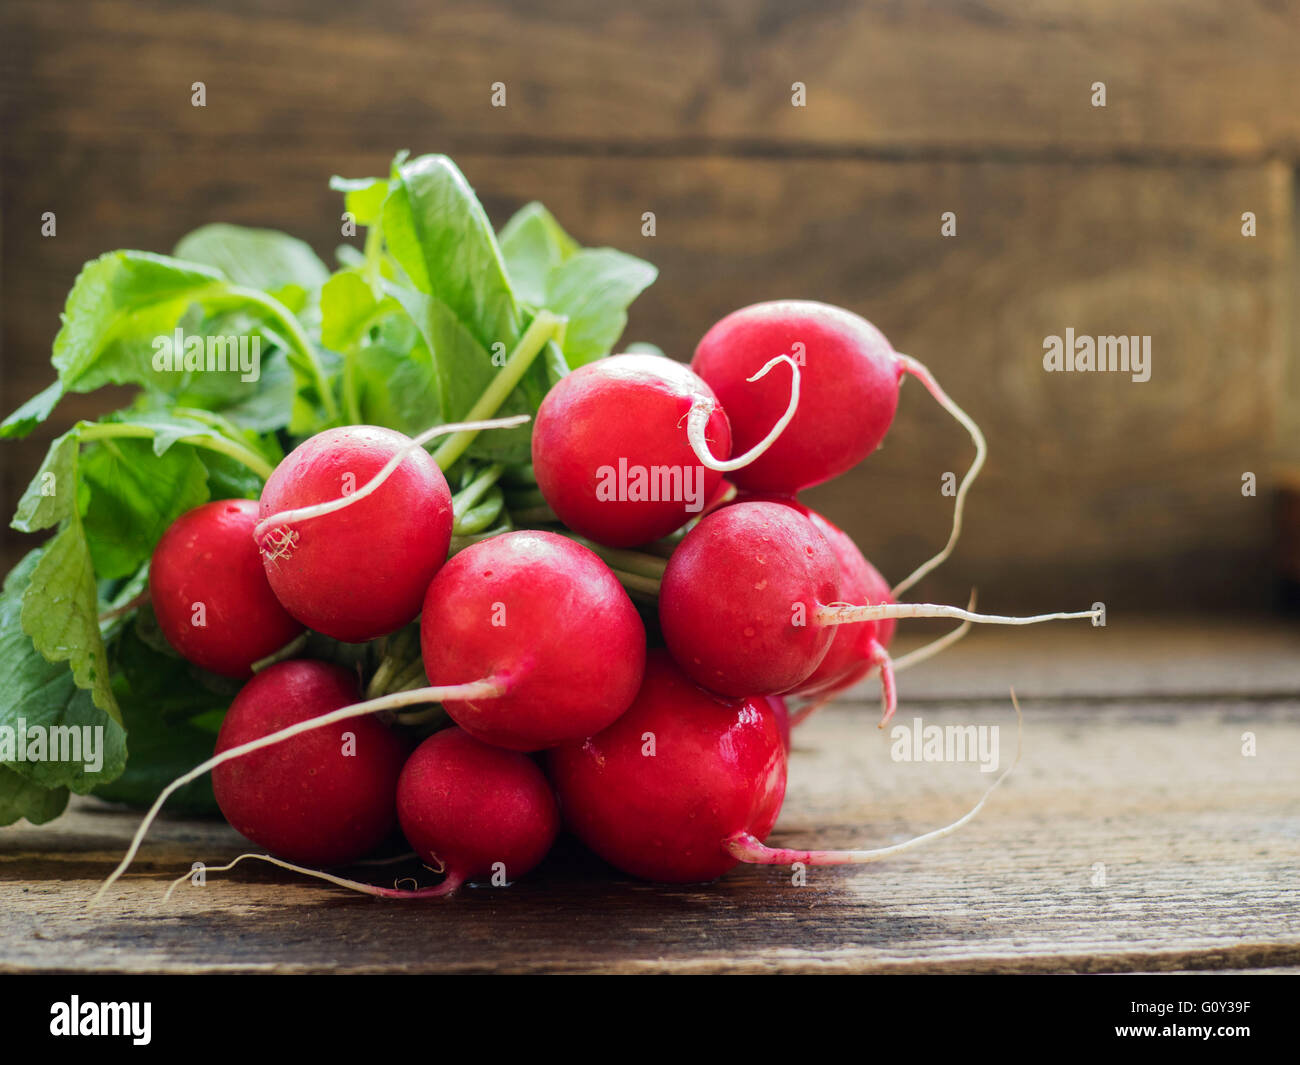 Bunch of fresh radishes on wooden table Stock Photo